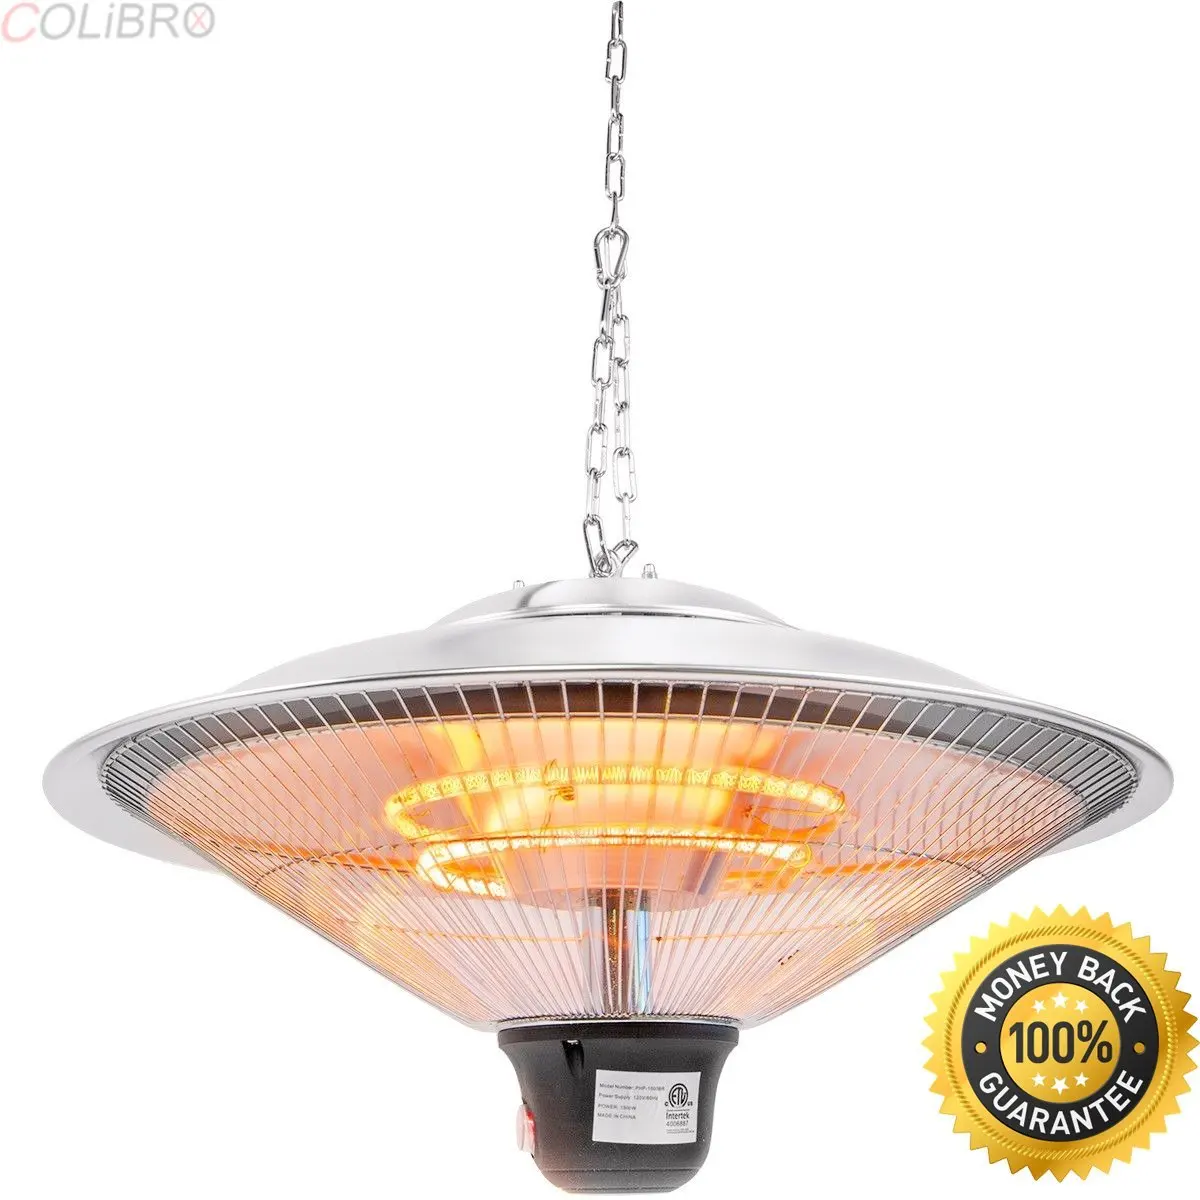 Cheap Ceiling Outdoor Heaters Find Ceiling Outdoor Heaters